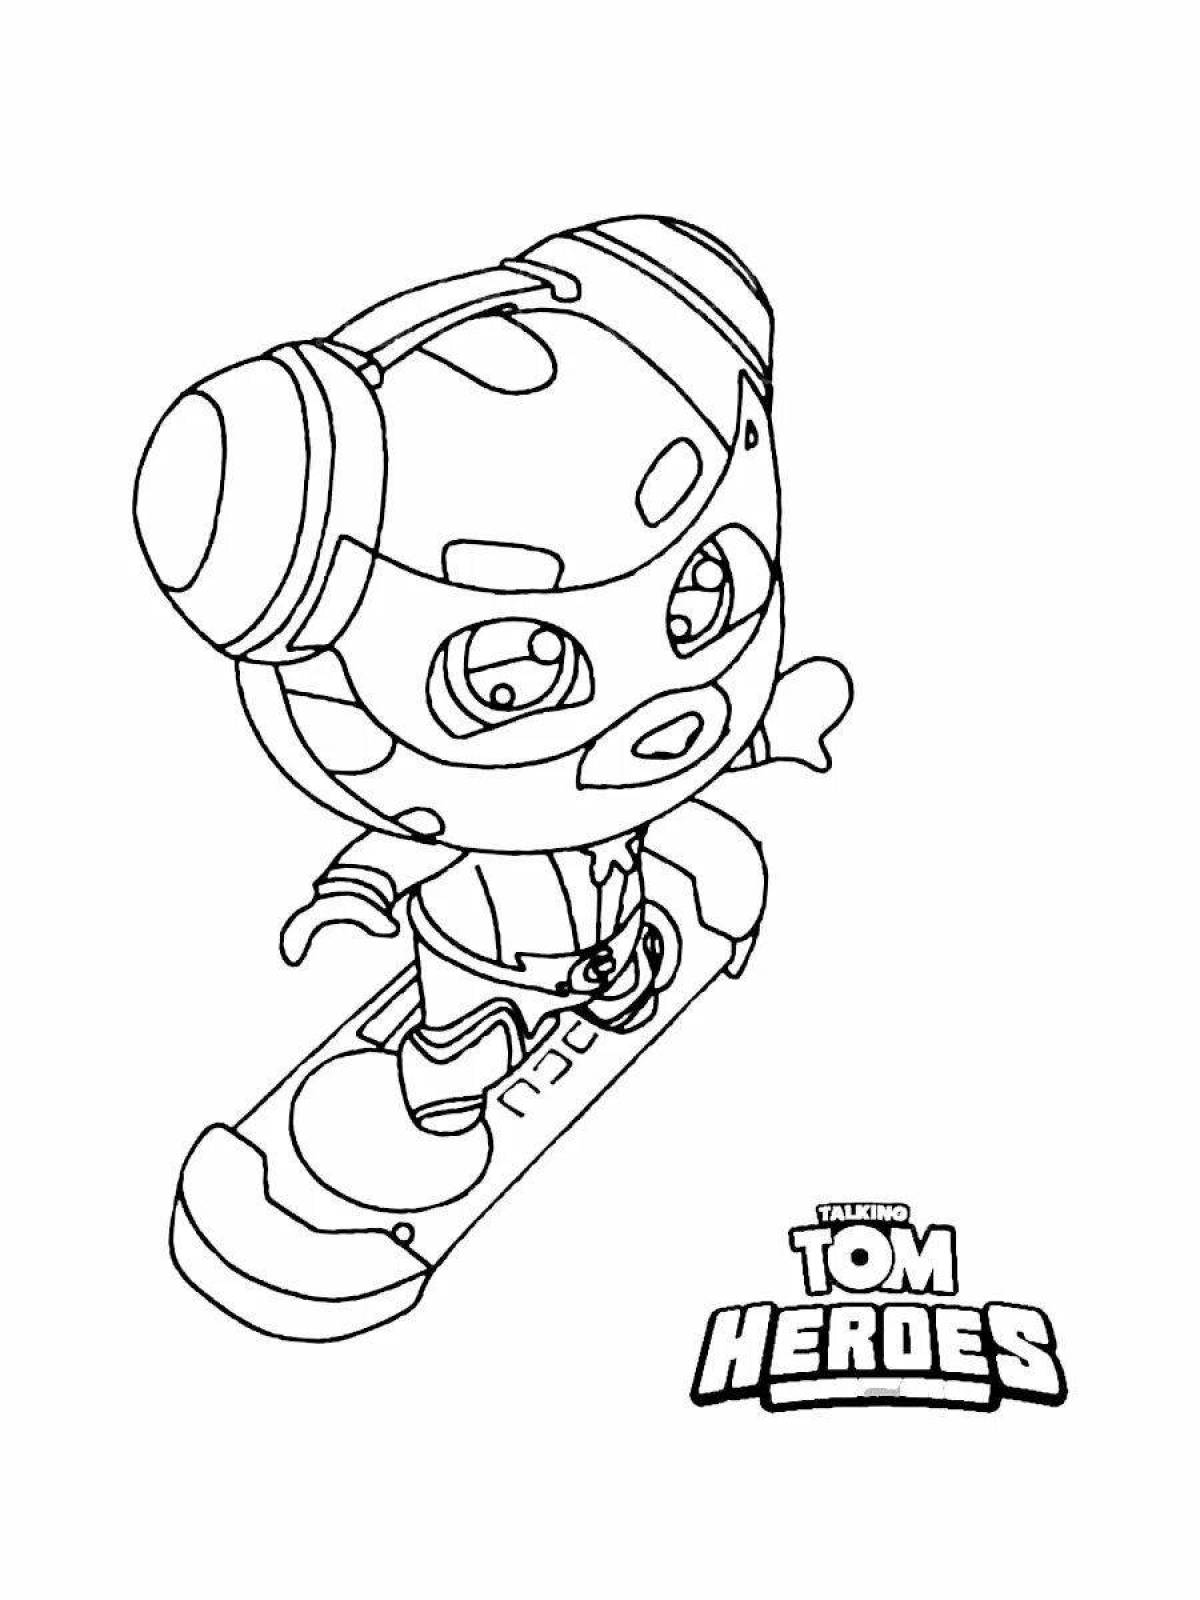 Tom chase's glorious heroes coloring book